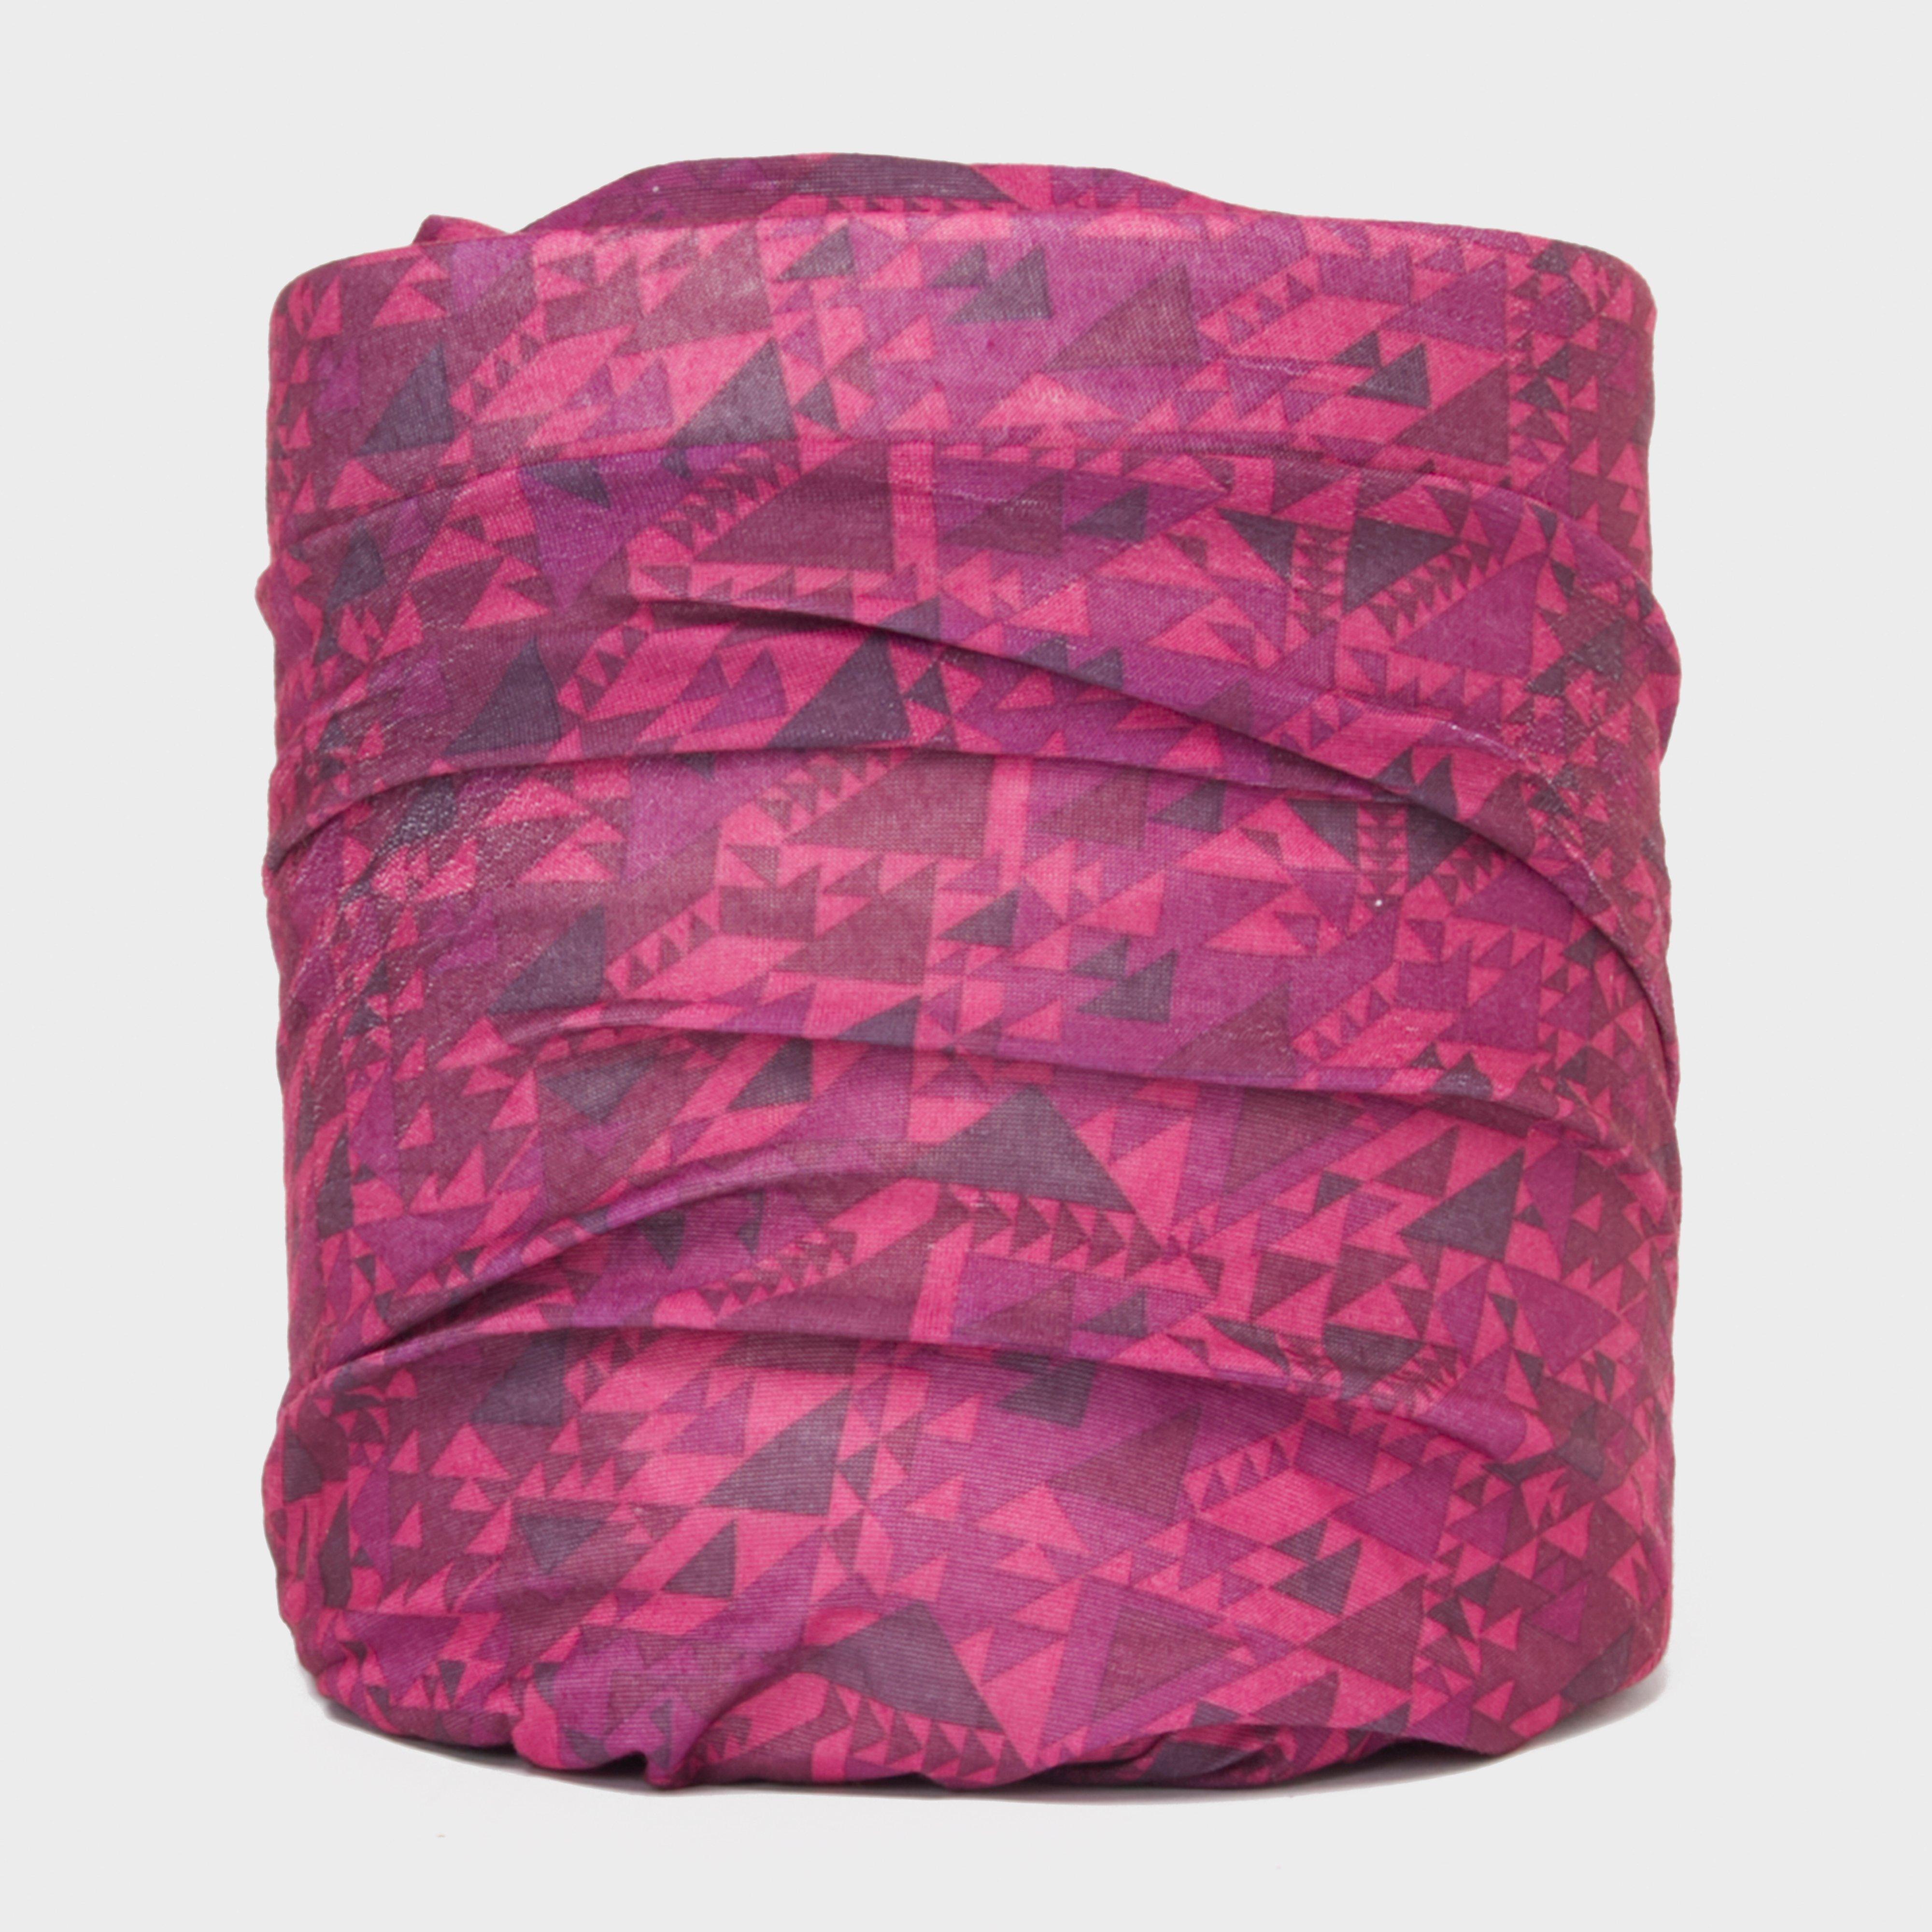 Peter Storm Patterned Chute  Pink